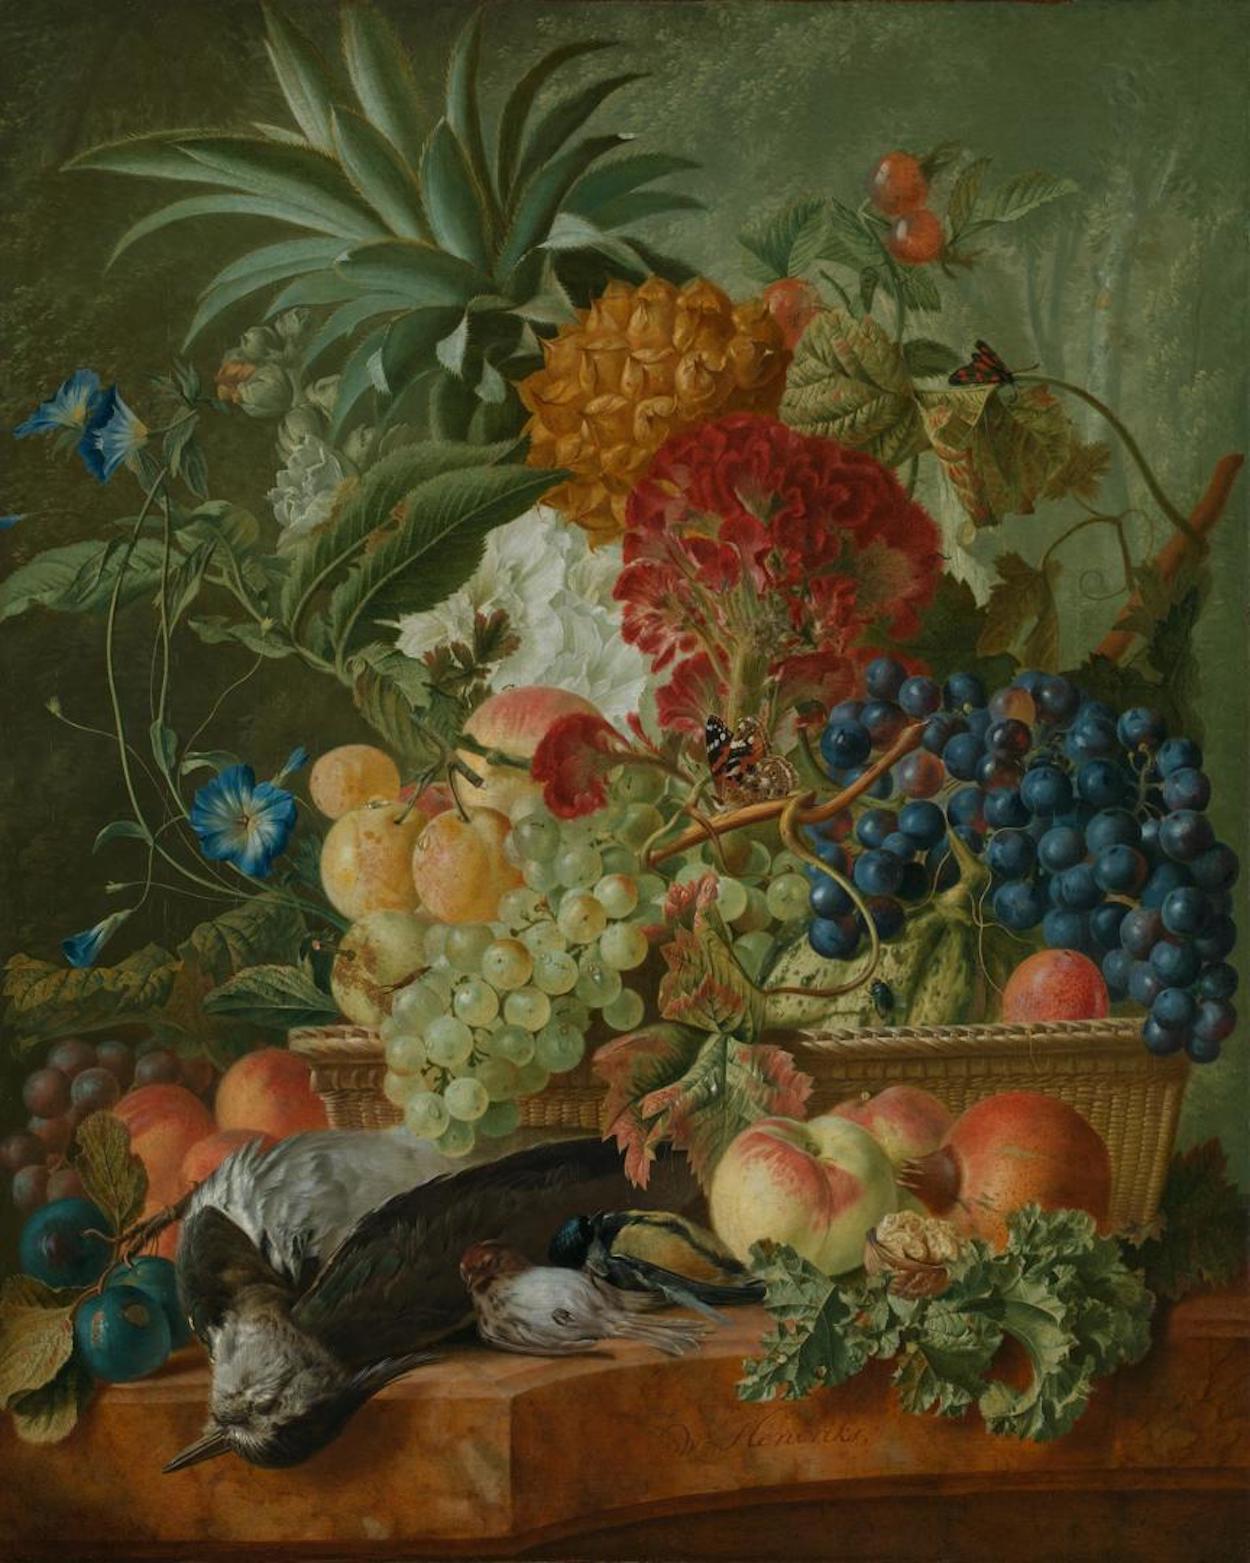 Fruit, Flowers and Dead Birds by Wybrand Hendriks - c. 1780 - 67.7 × 54.6 cm National Gallery